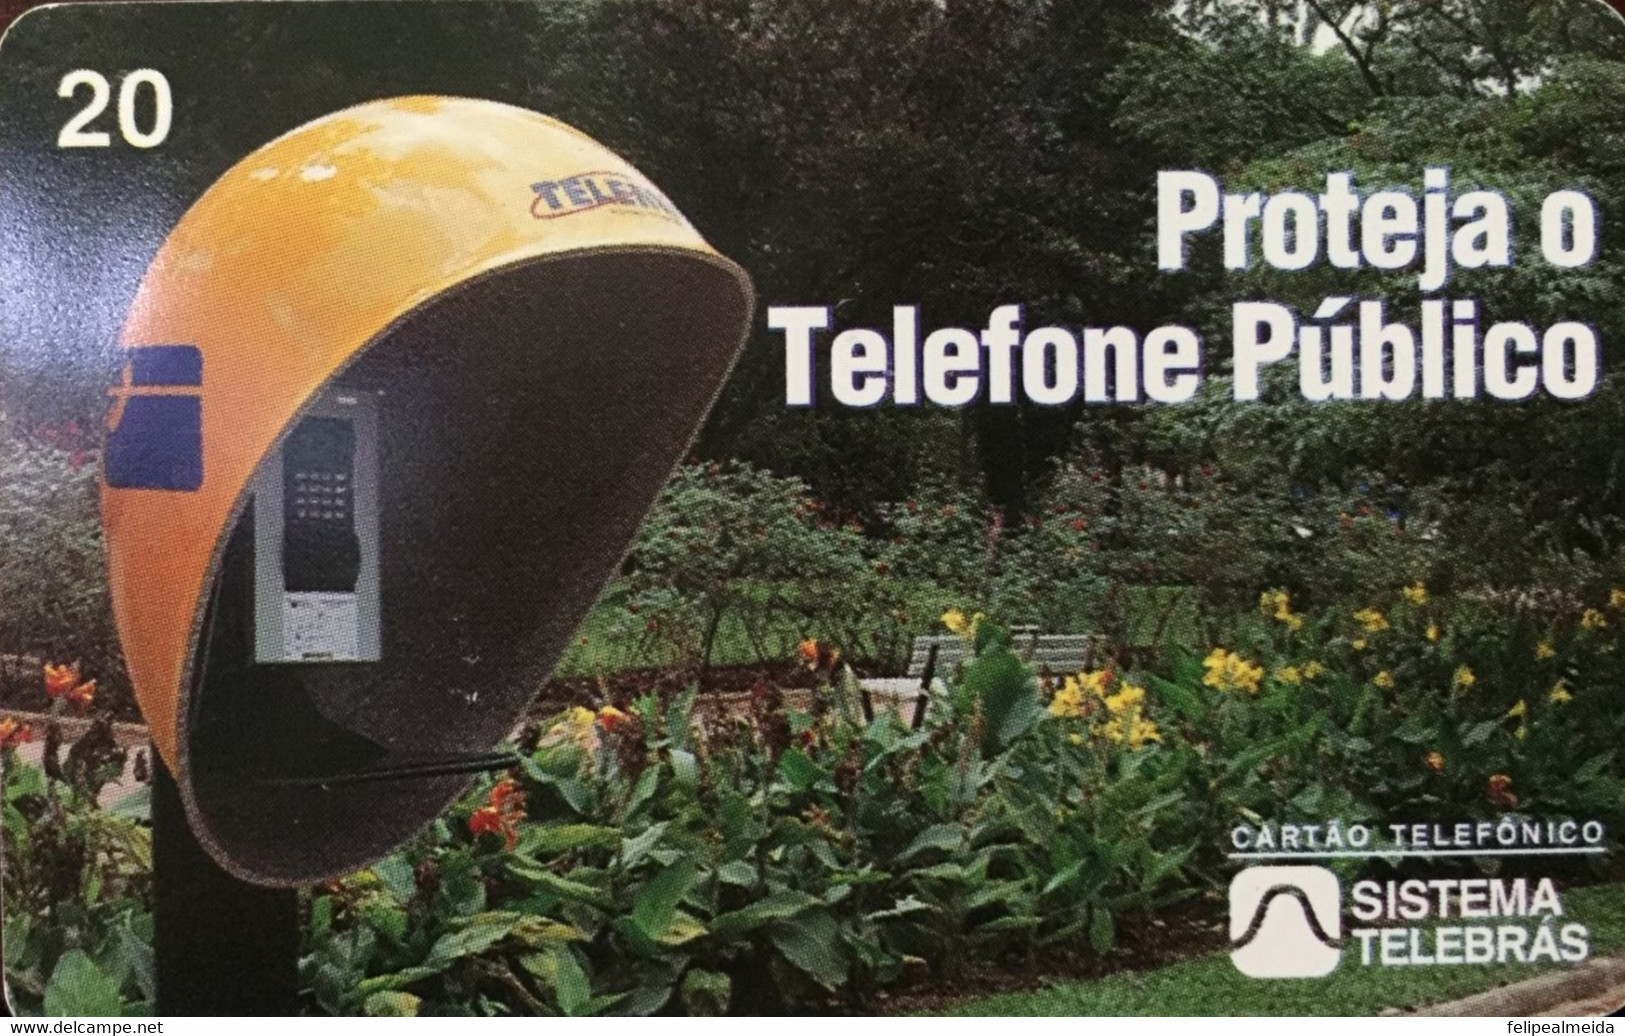 Phone Card Manufactured By Telebras In 1998 - Advertising Campaign For The Conservation Of Public Telephones - Telekom-Betreiber